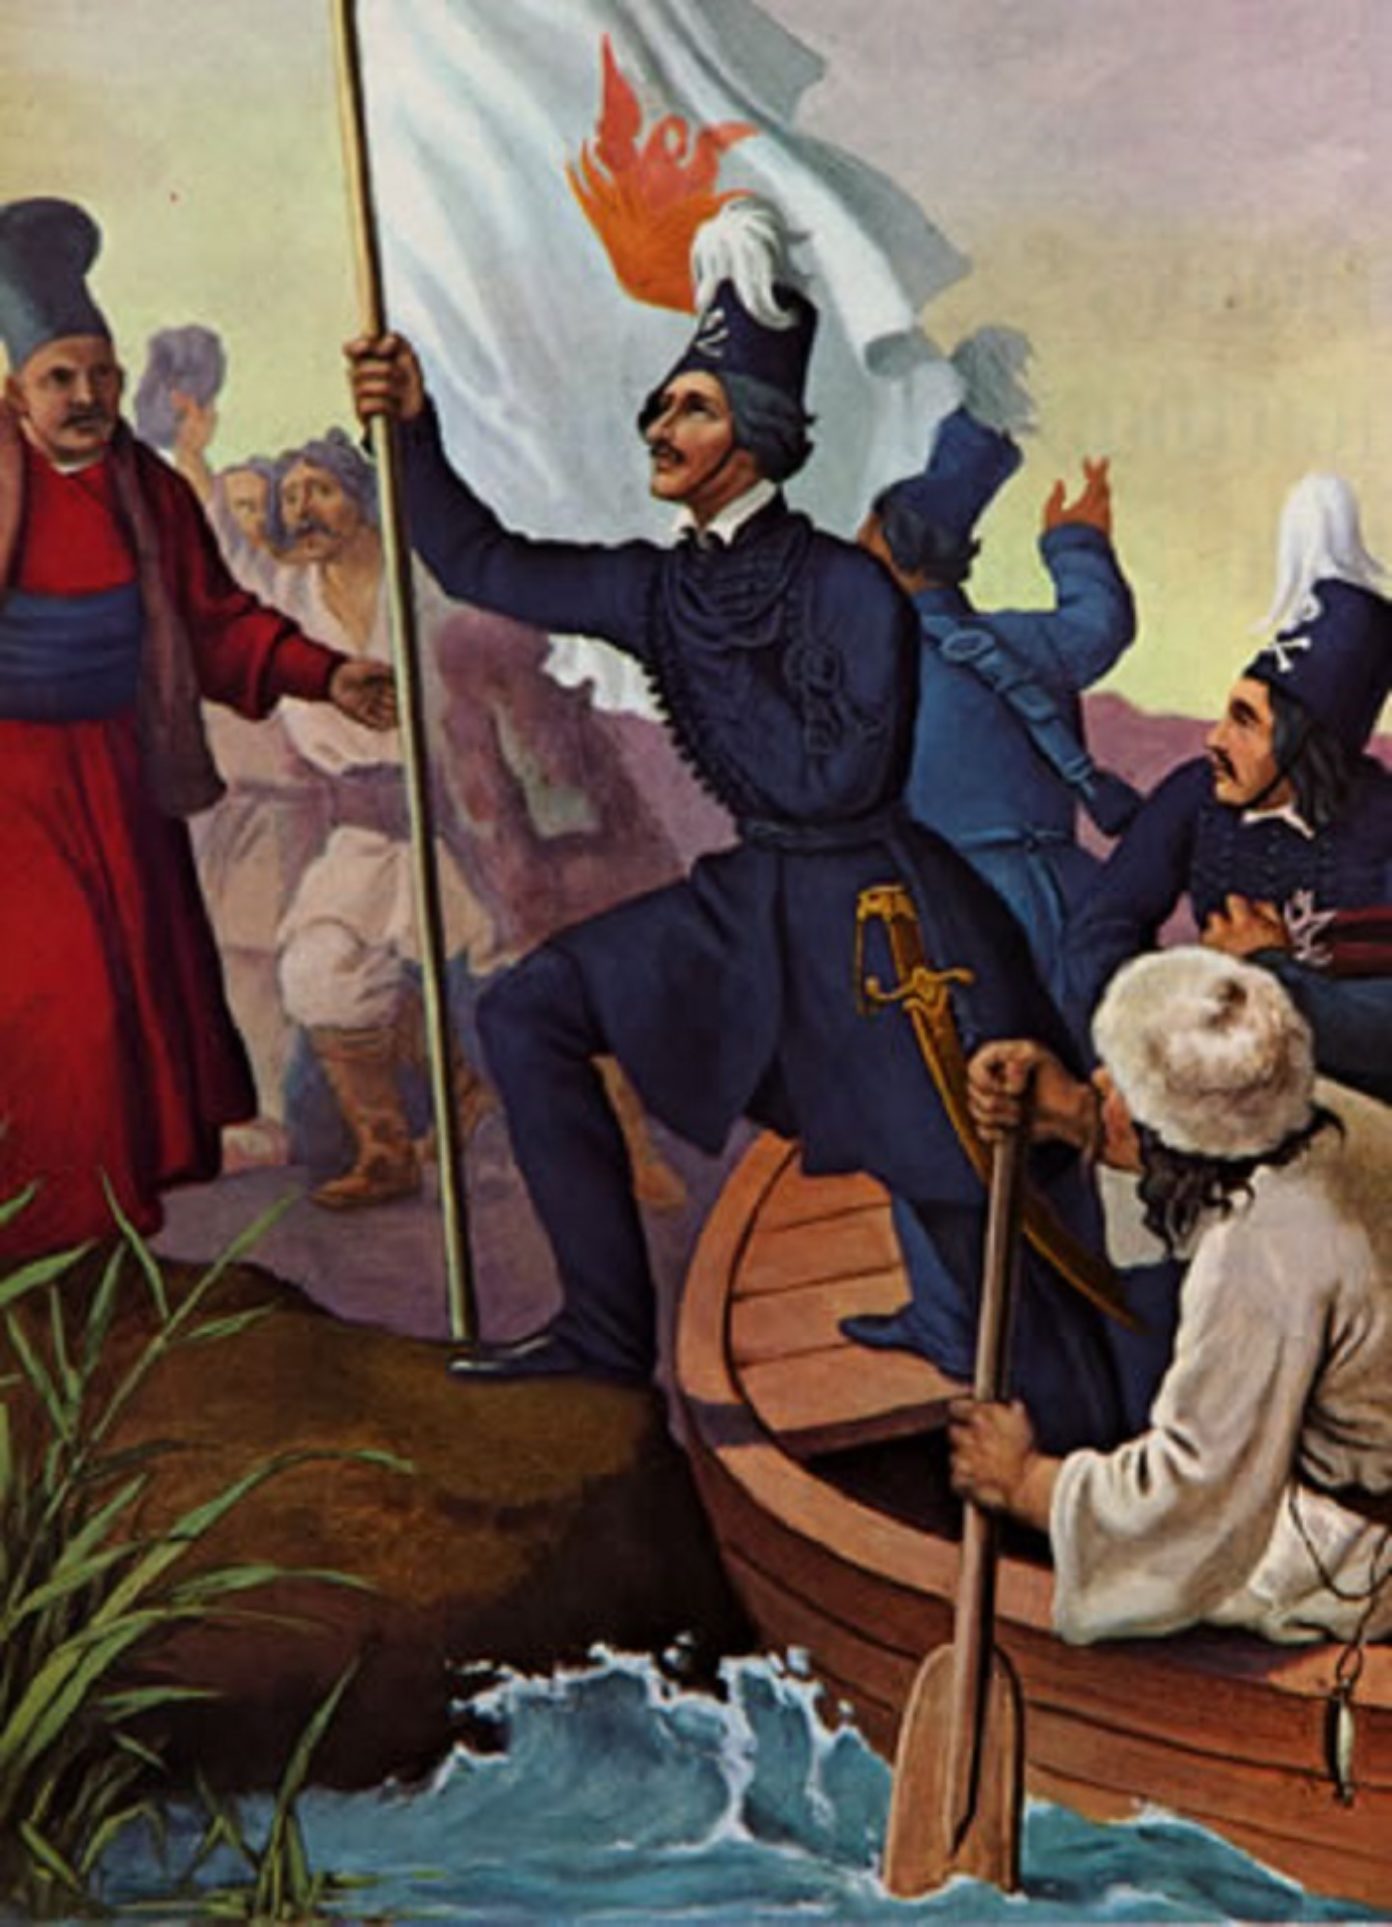 Alexandros Ypsilantis: The Greek Hero Who Sparked the War of Independence